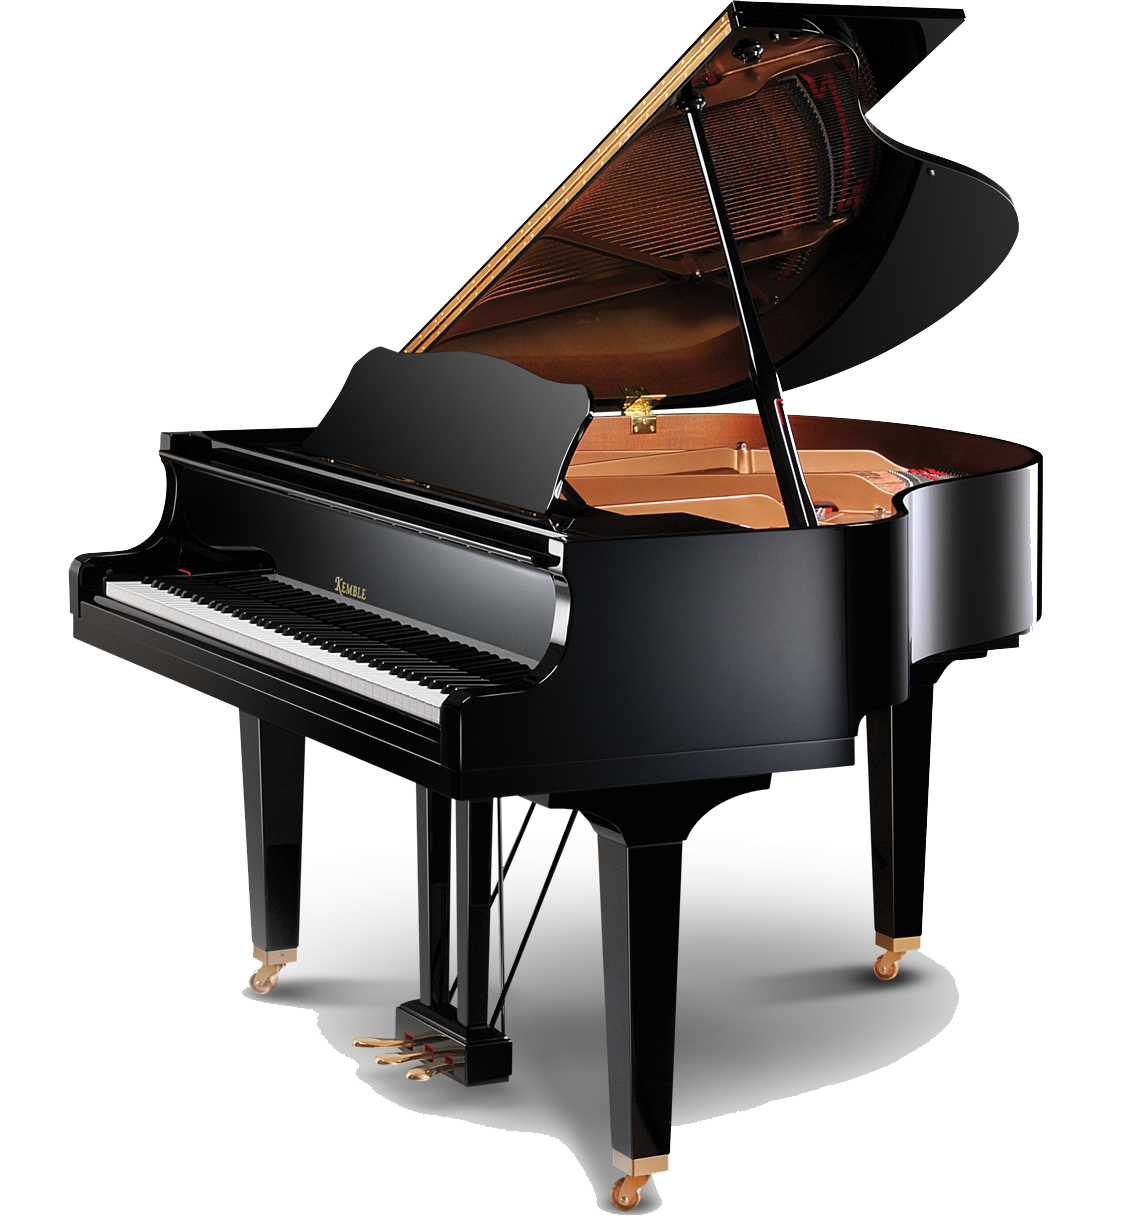 Png transparent images all. Back clipart piano